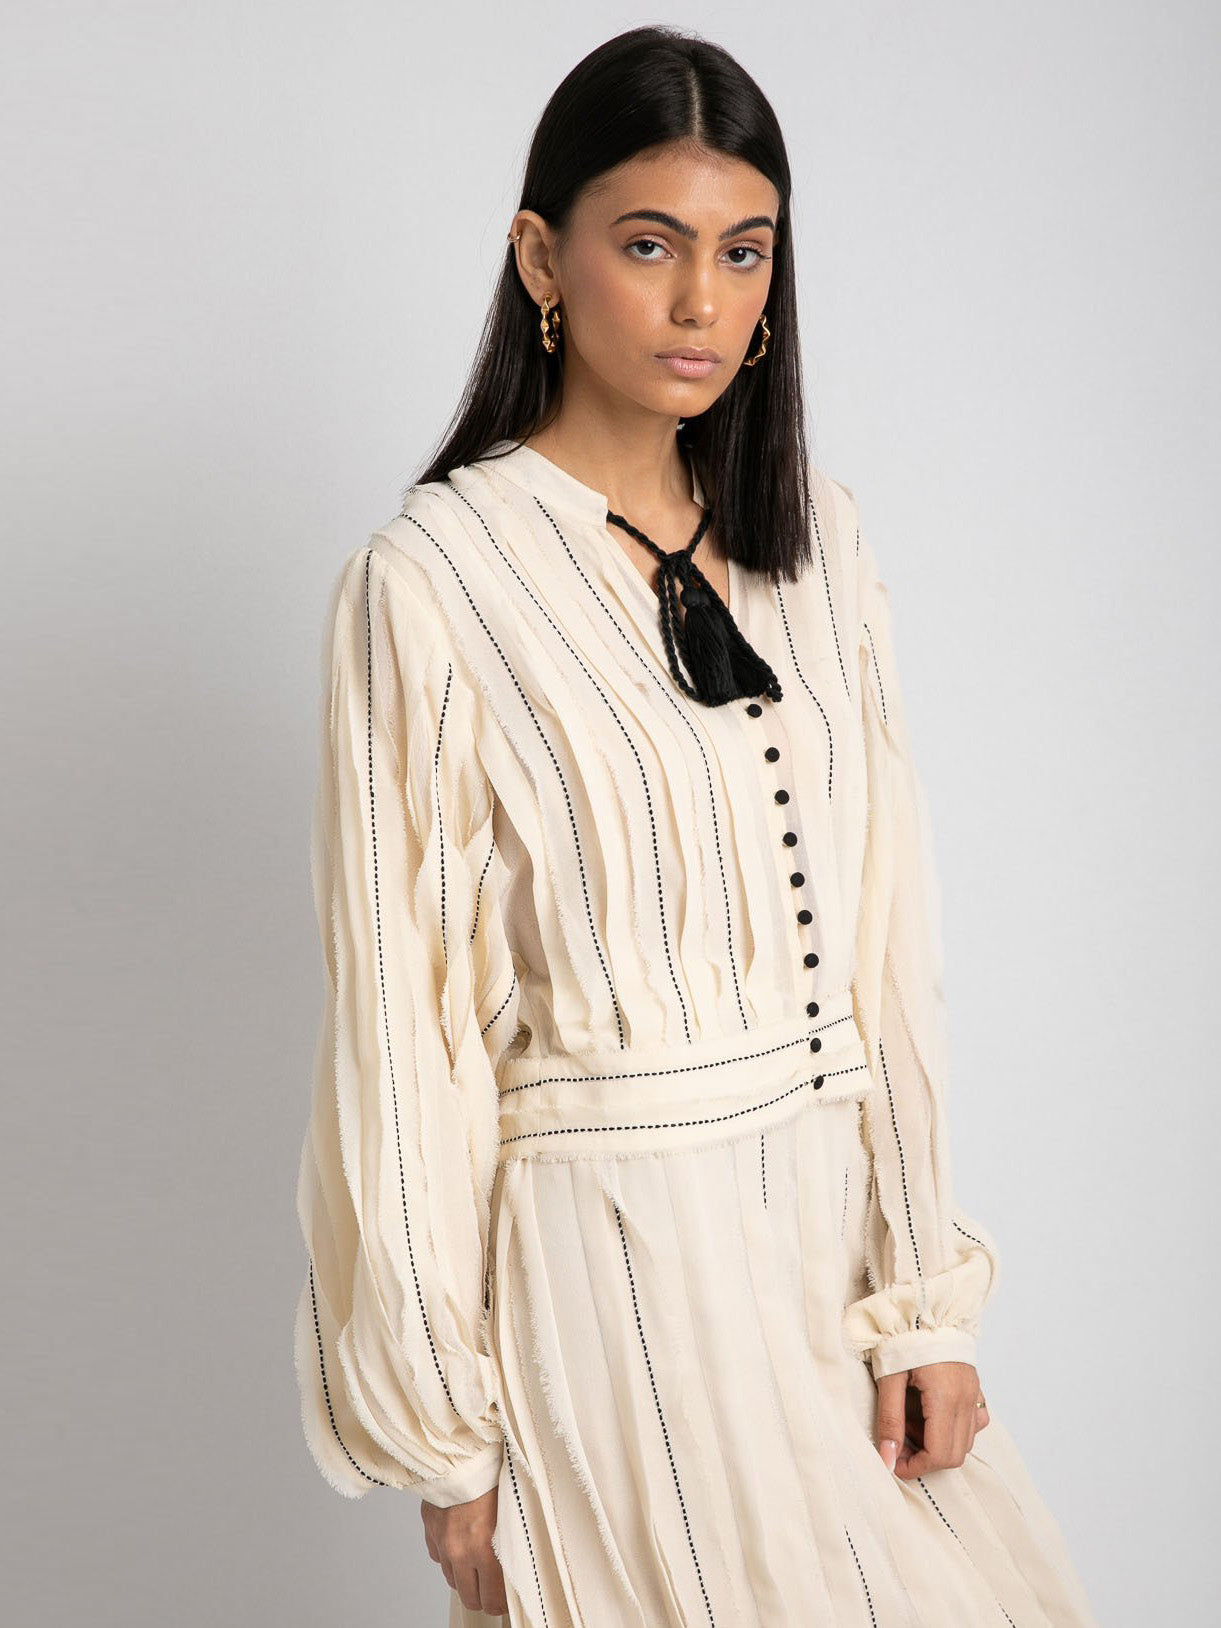 Ruffled Blouse - Buttoned - Striped